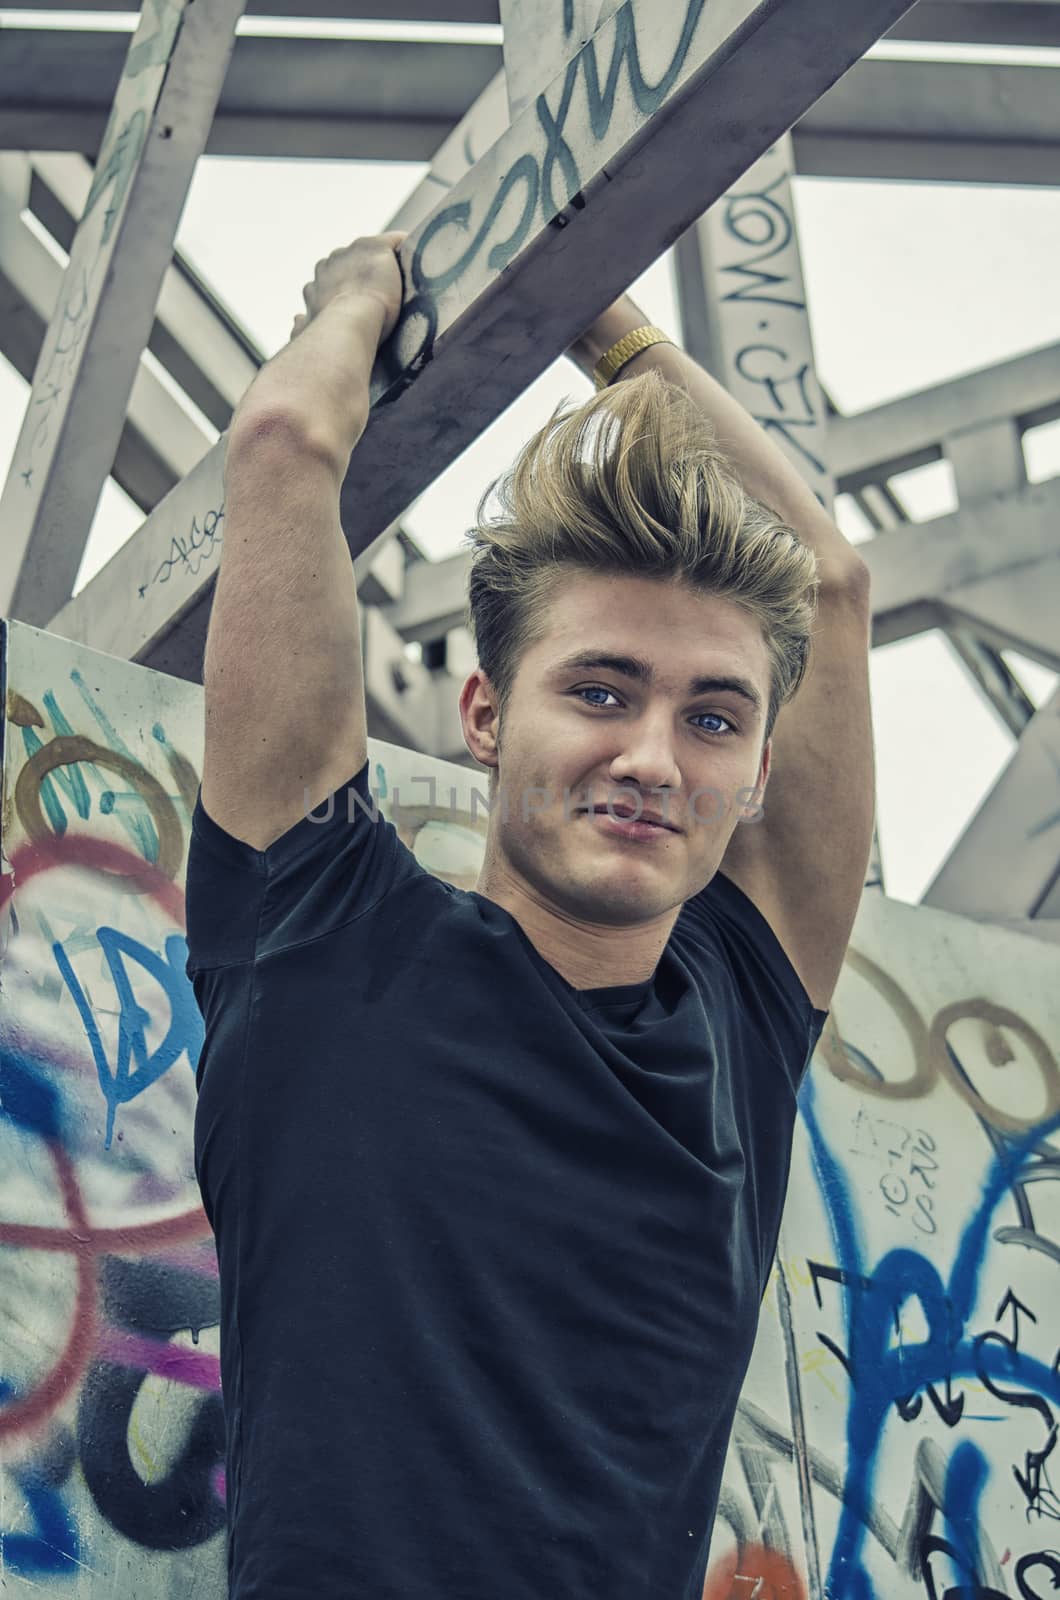 Attractive blue eyed, blond young man in black t-shirt hanging from concrete structure